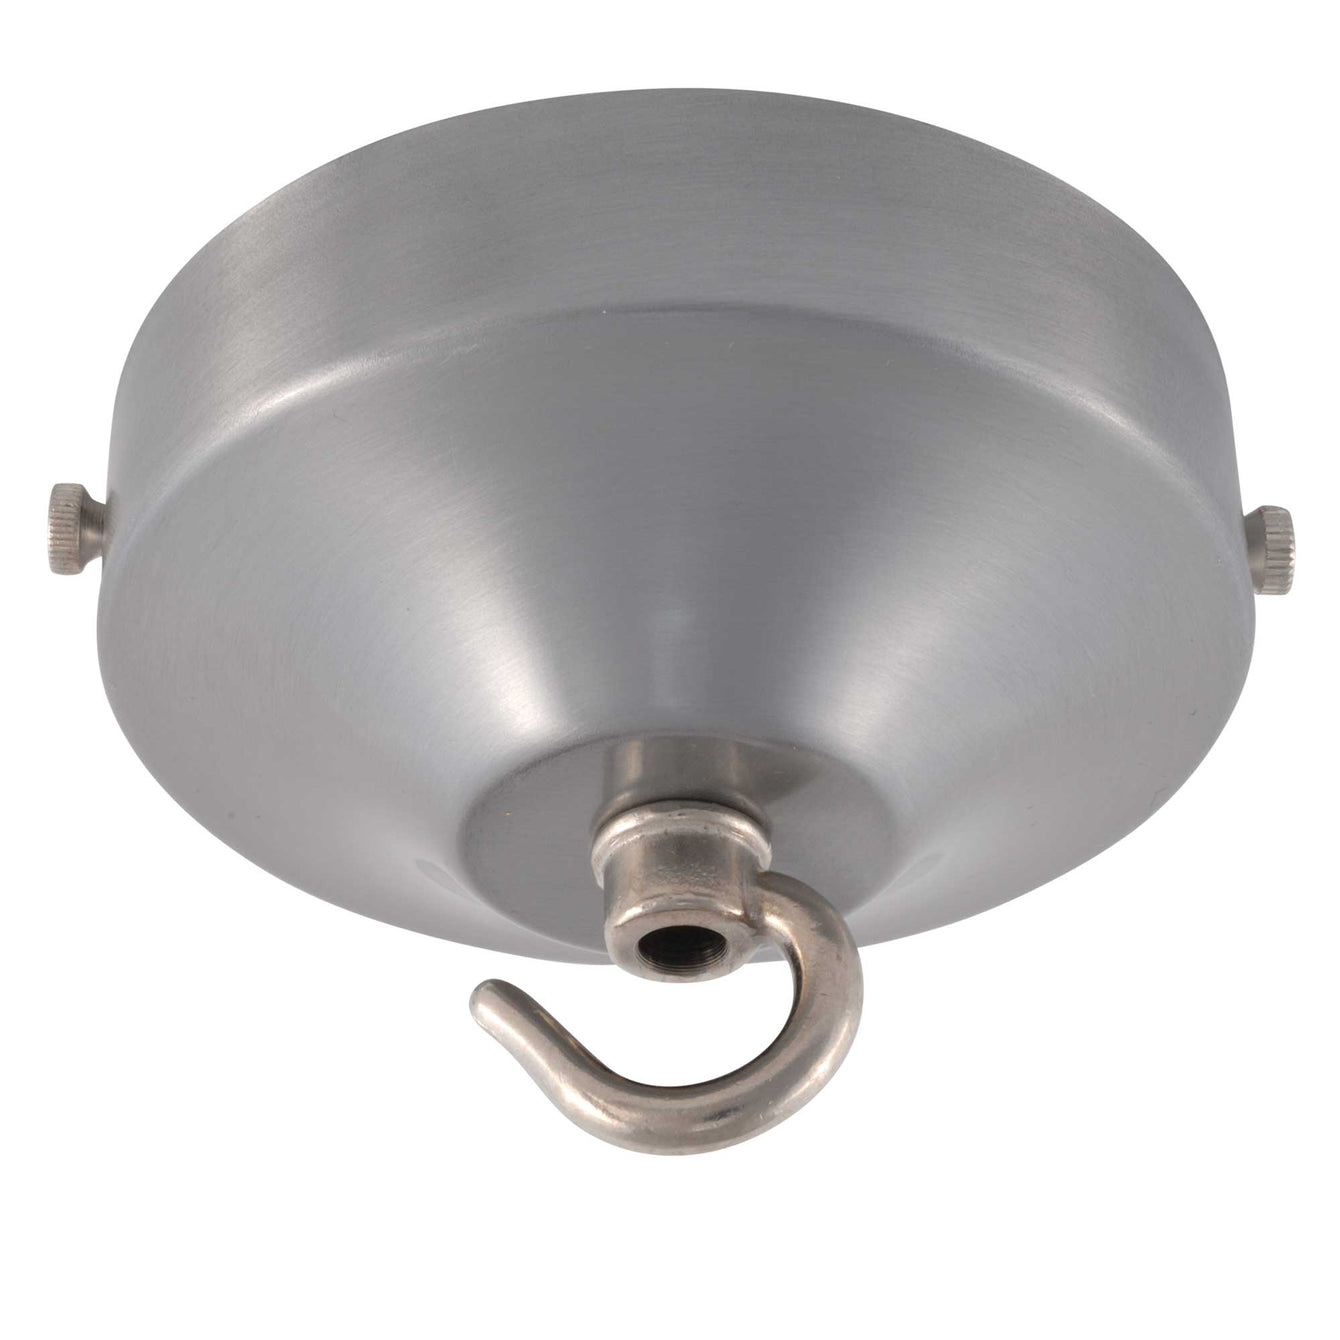 ElekTek 100mm Diameter Convex Ceiling Rose with Strap Bracket and Hook Metallic and Powder Coated Finishes Pink